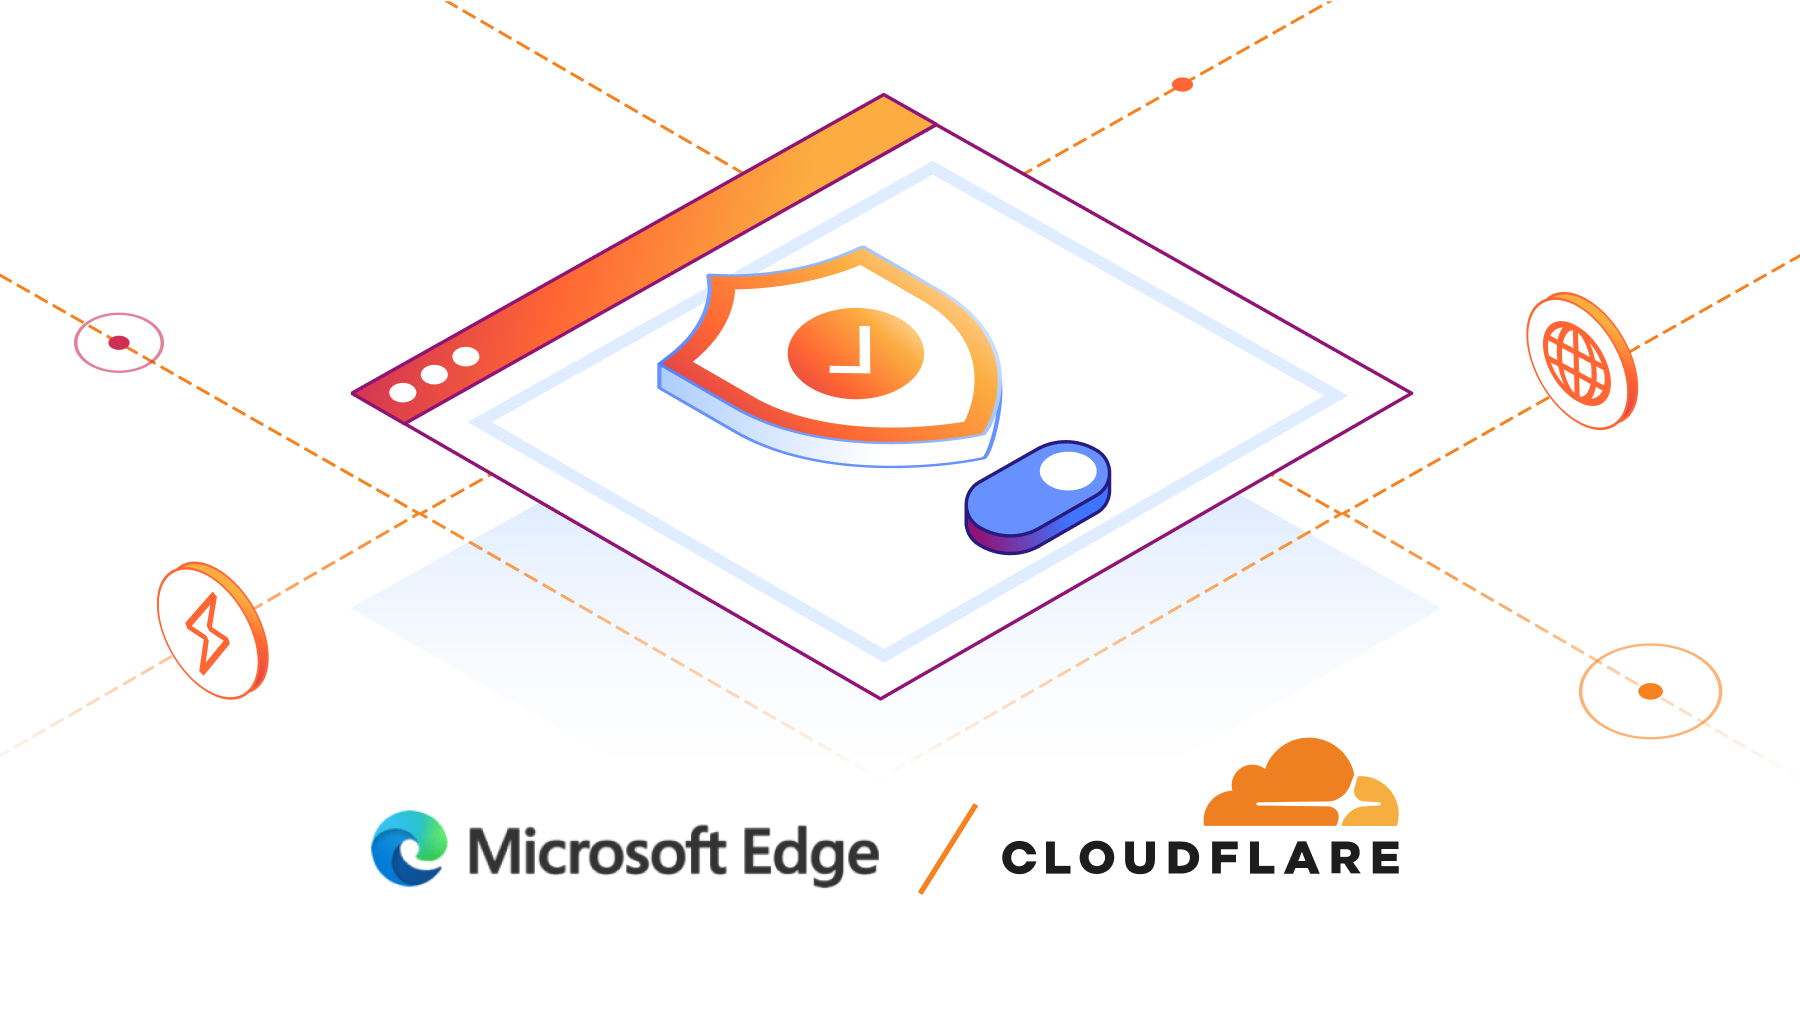 Microsoft Edge upgrades built-in Cloudflare VPN with 5GB of data